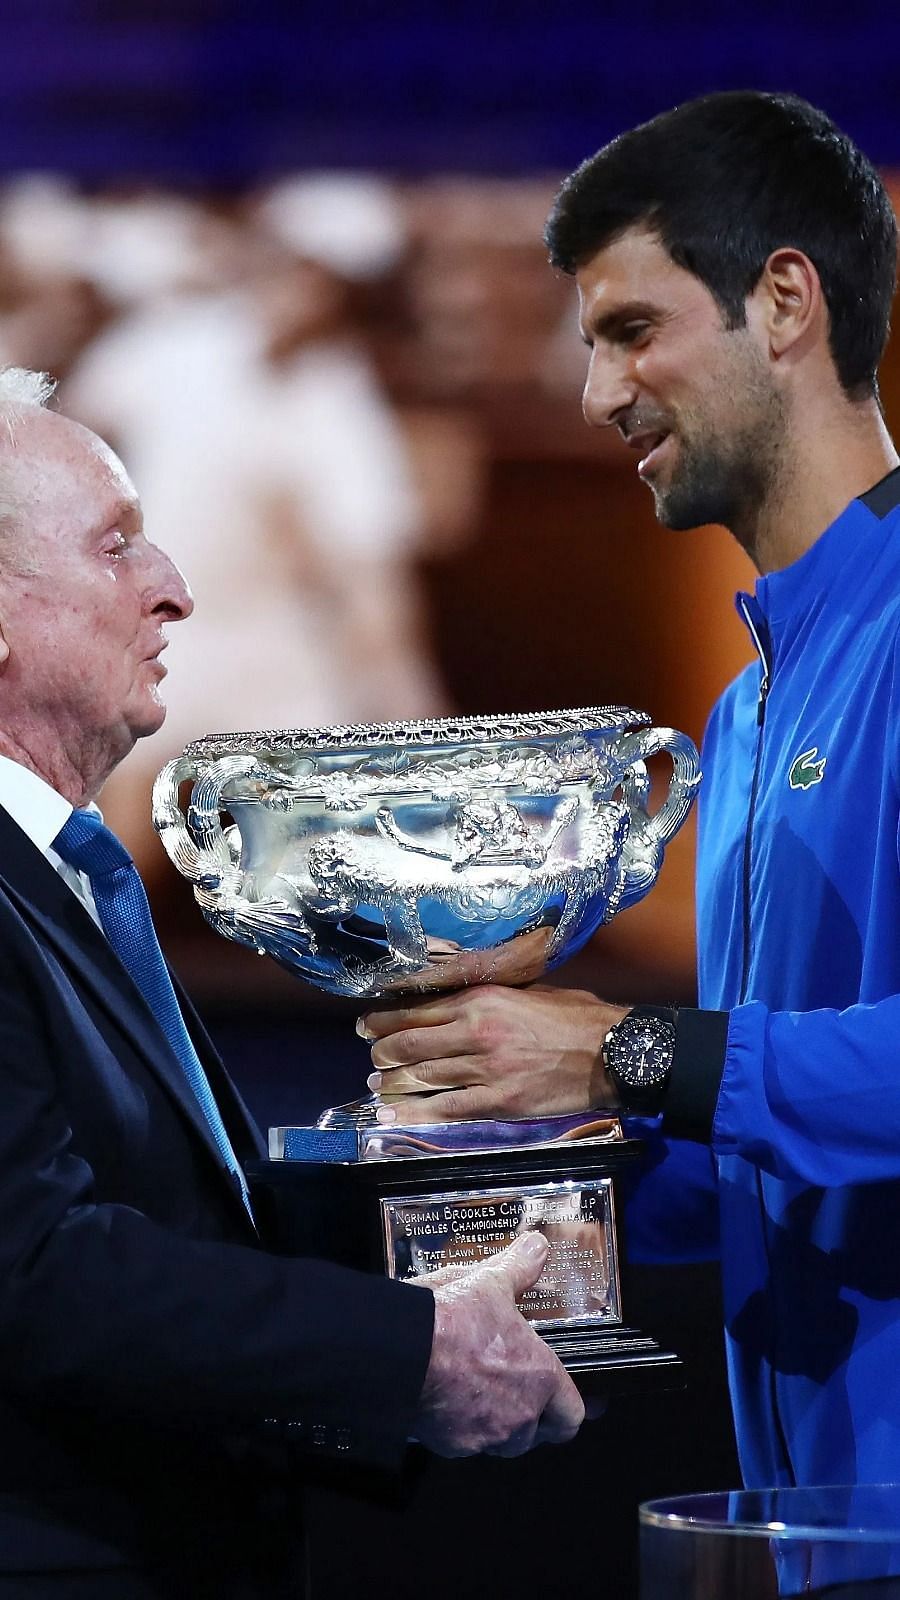 Arrangement Jep Slid Rod Laver believes Novak Djokovic could be adding pressure on himself by  talking about Calendar Slam, says "lots of things can go wrong" for him